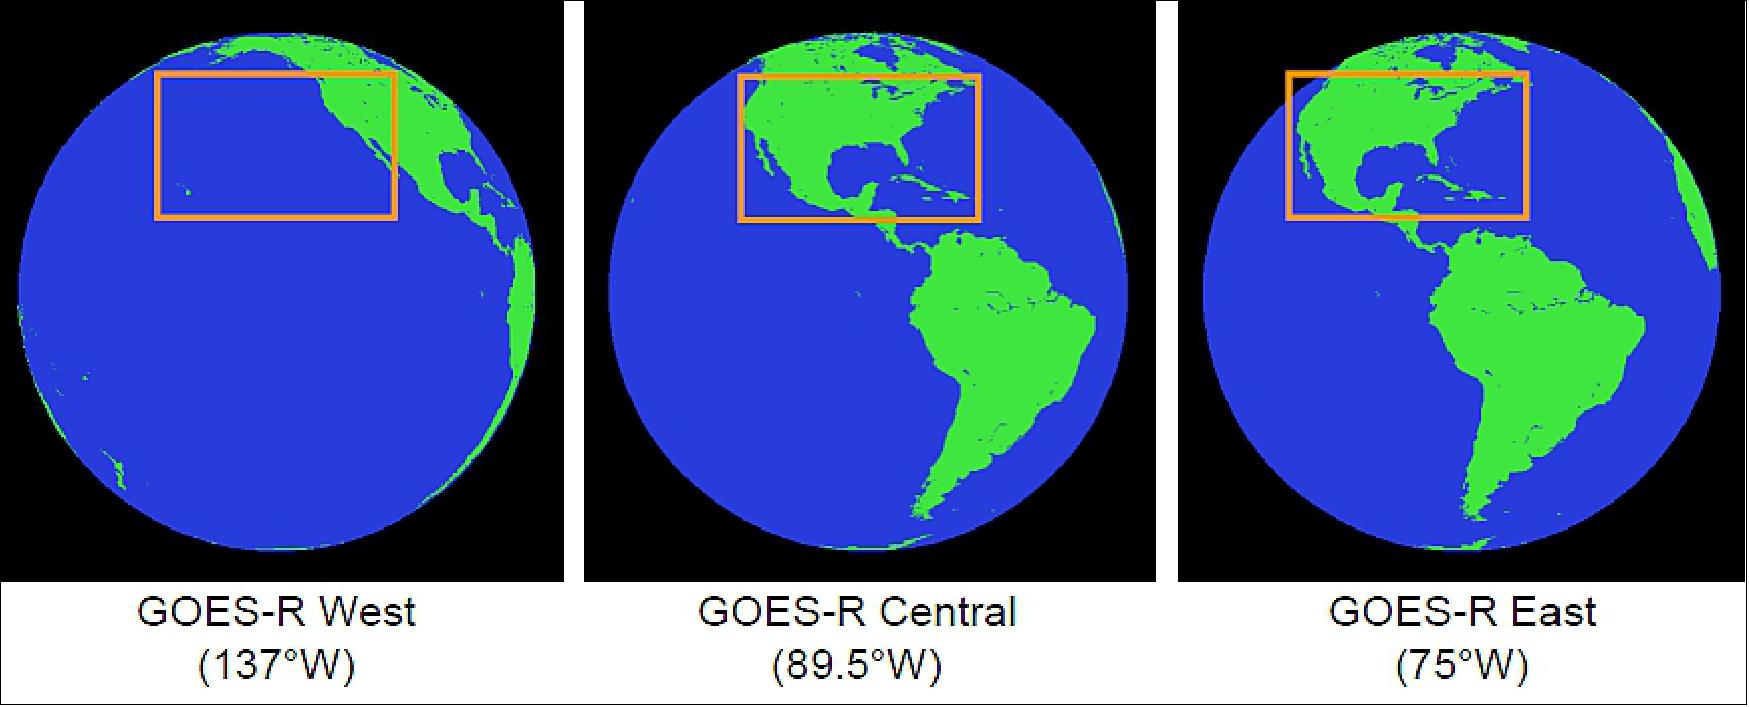 Figure 53: ABI CONUS Images for GOES-R West, Central, and East (image credit: Harris Corp.)